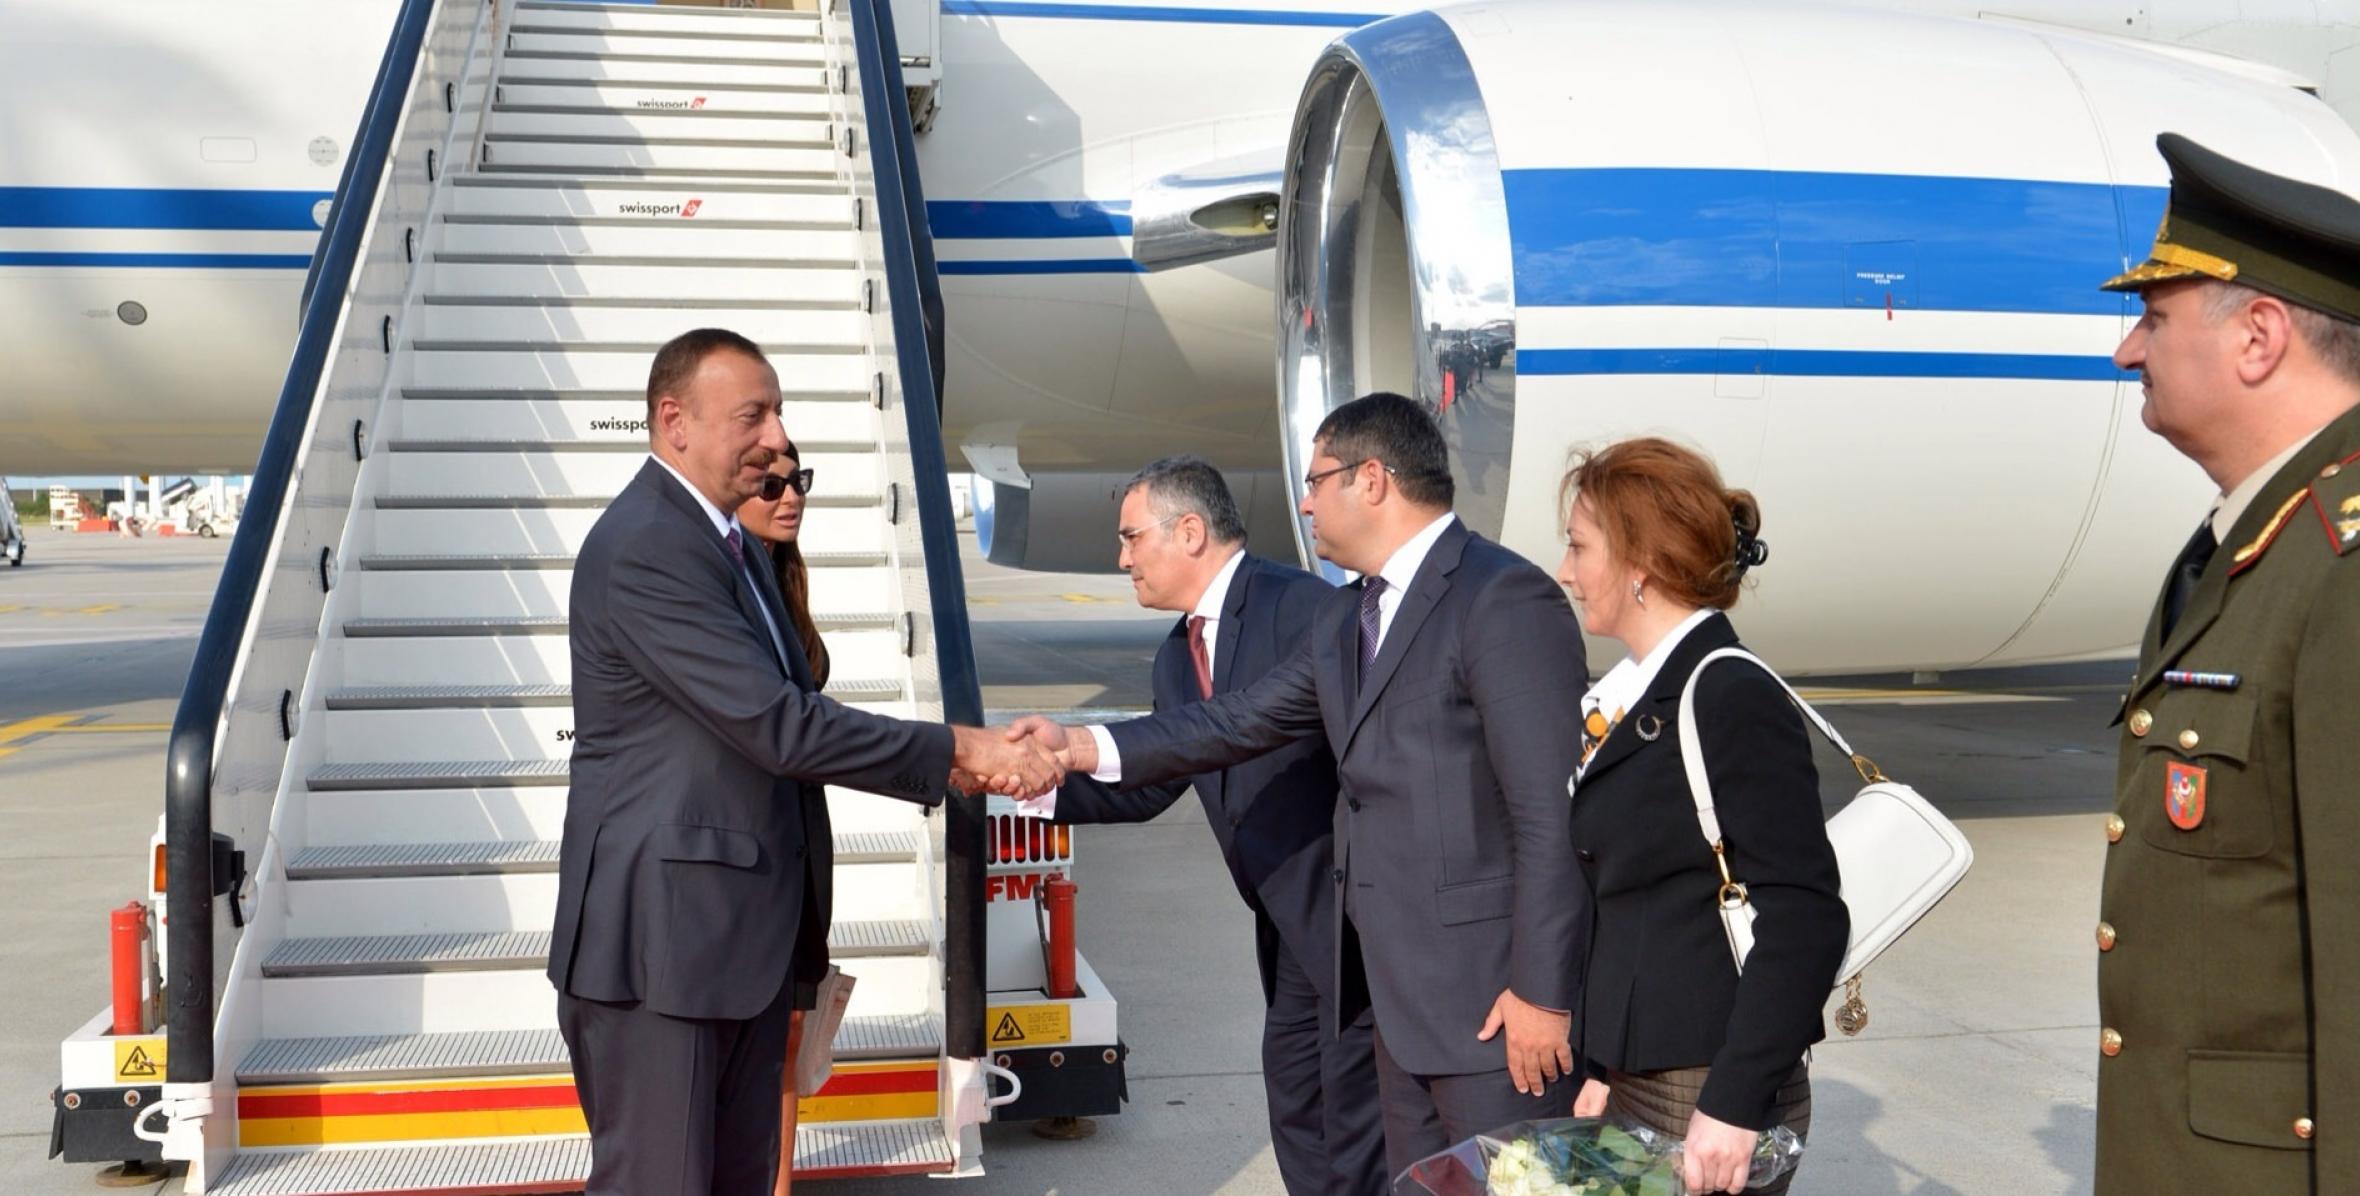 Ilham Aliyev arrived in Belgium on a working visit